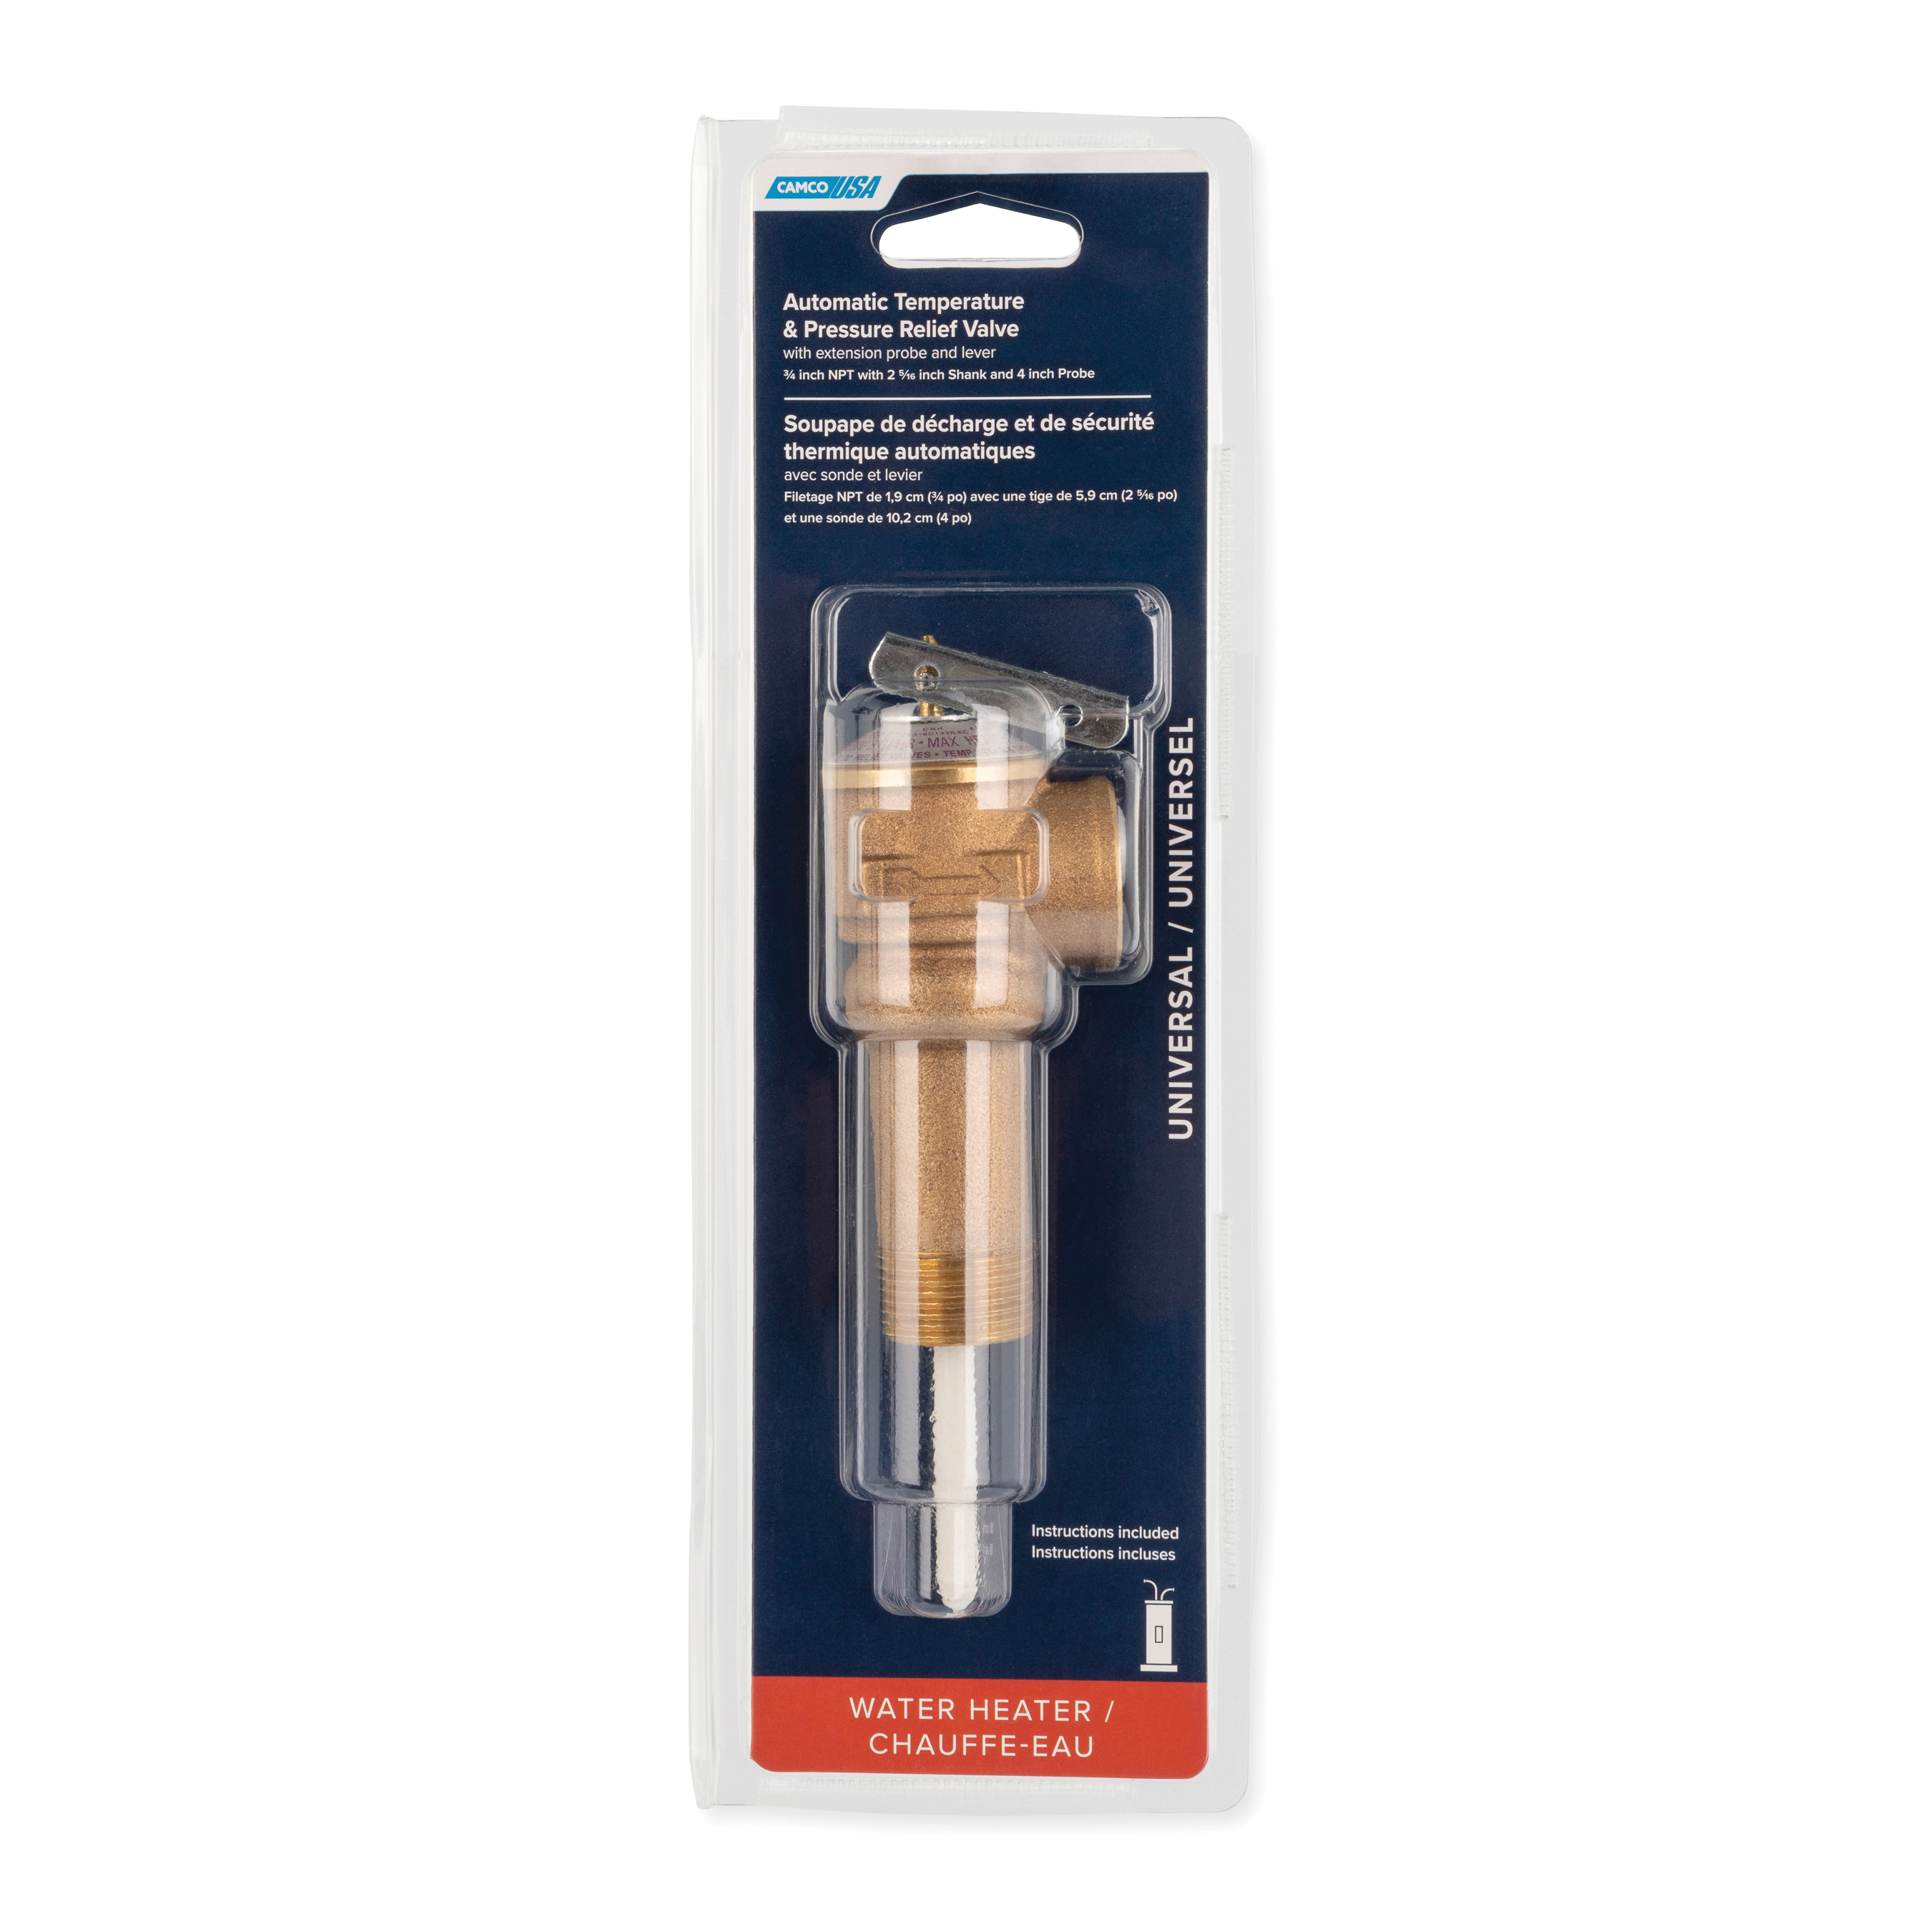 Camco 10493 Temperature and Pressure Relief Valve With 2-1/2 in L Shank, 4 in Probe and Stainless Steel Spring, 3/4 in NPT, 150 psi and 210 deg, Brass, Domestic